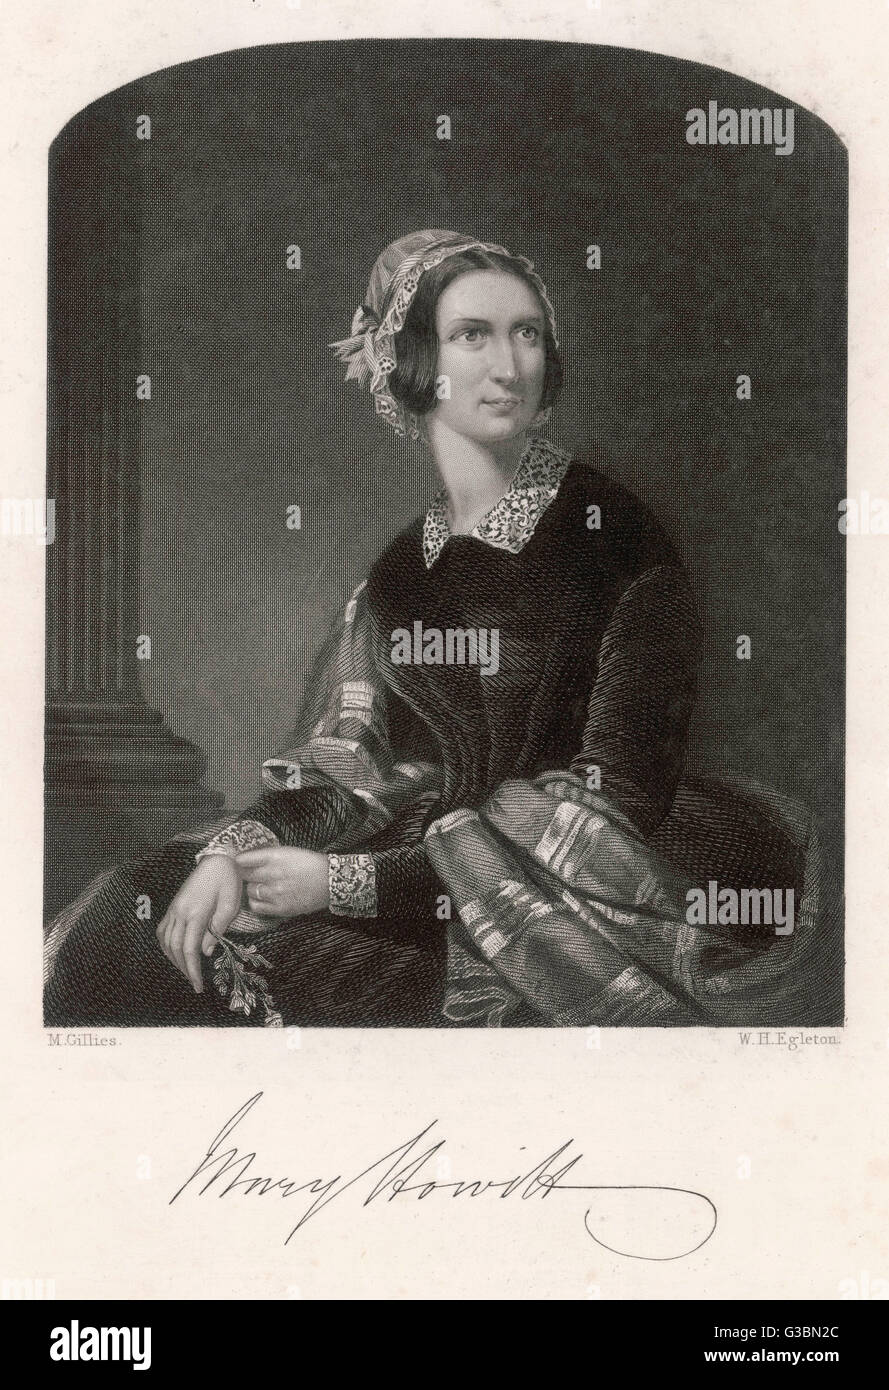 MARY HOWITT Writer, wife of William Howitt  with her autograph       Date: 1799 - 1888 Stock Photo